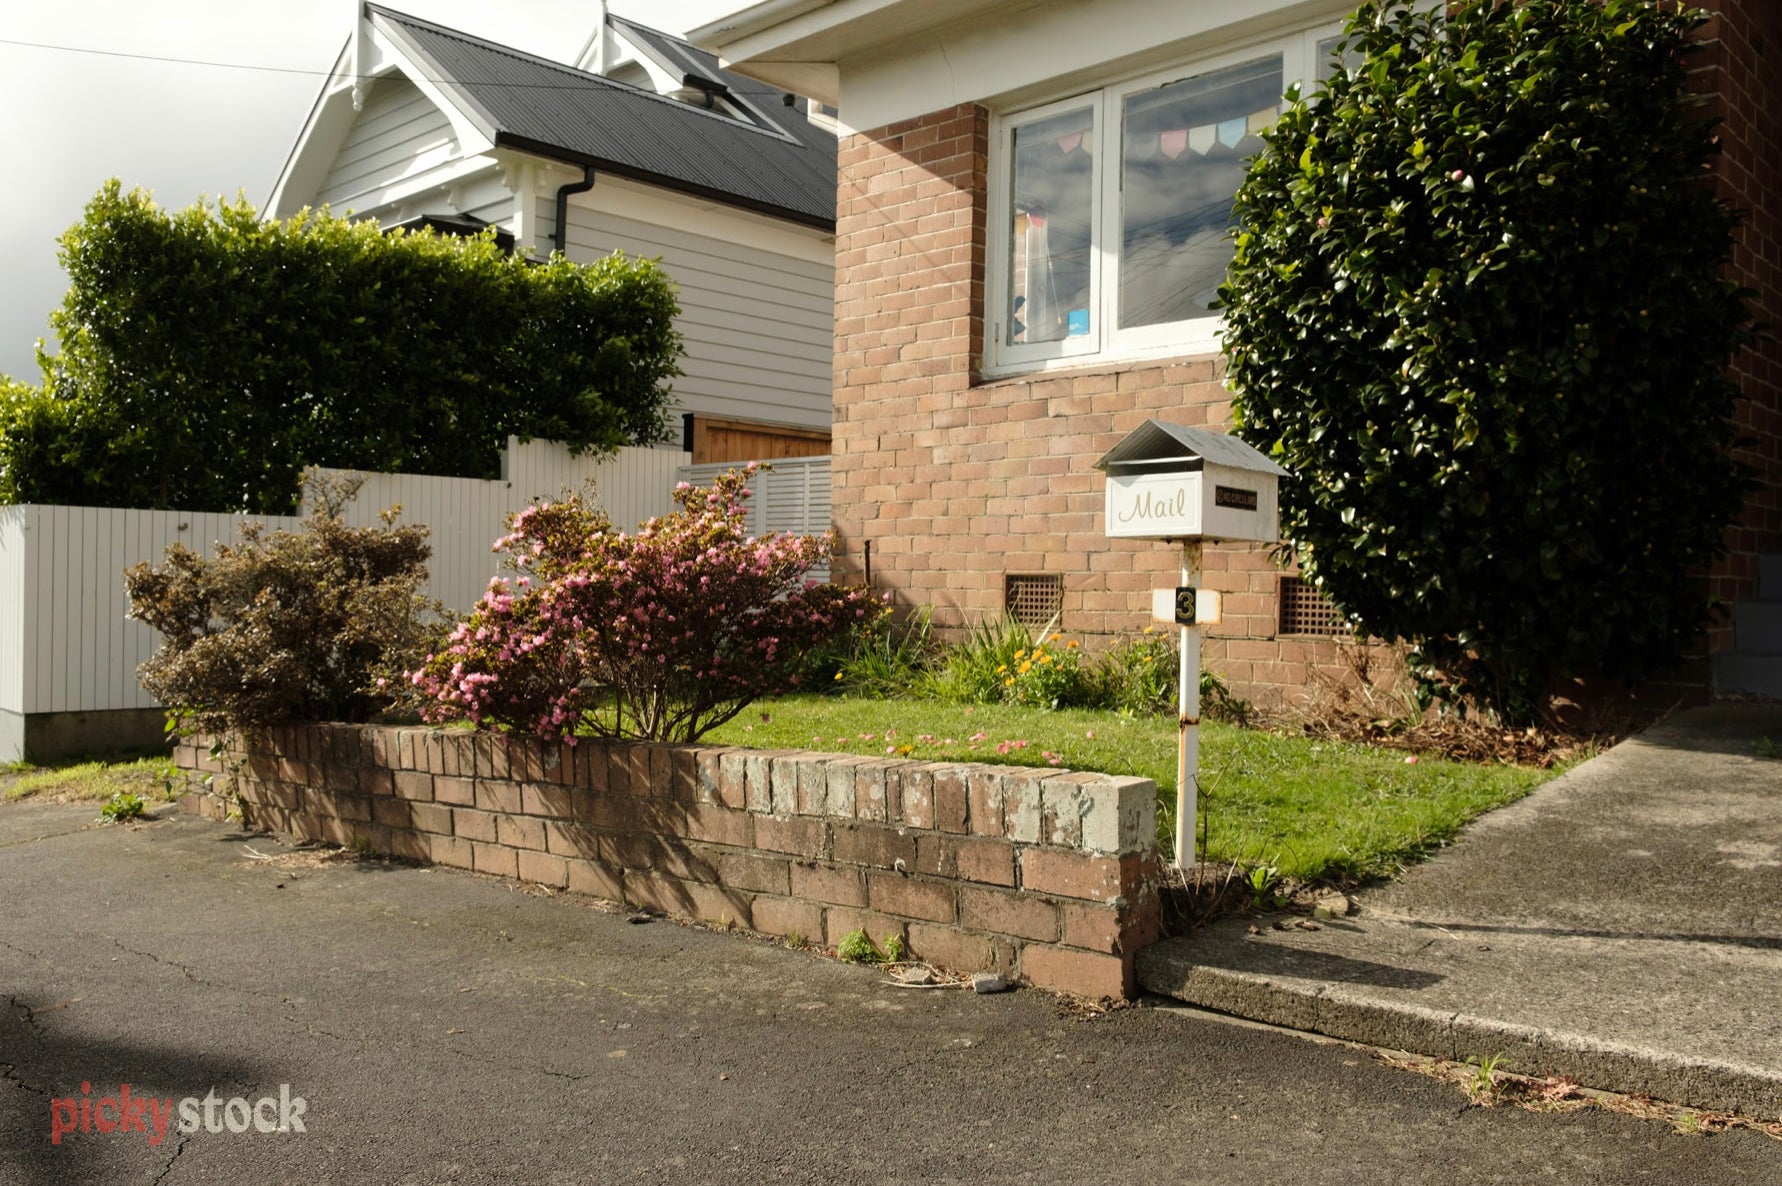 A landscape of suburban orange brick house with a white metal mailbox bearing the number three and a small brick retaining wall with a garden blooming atop it.